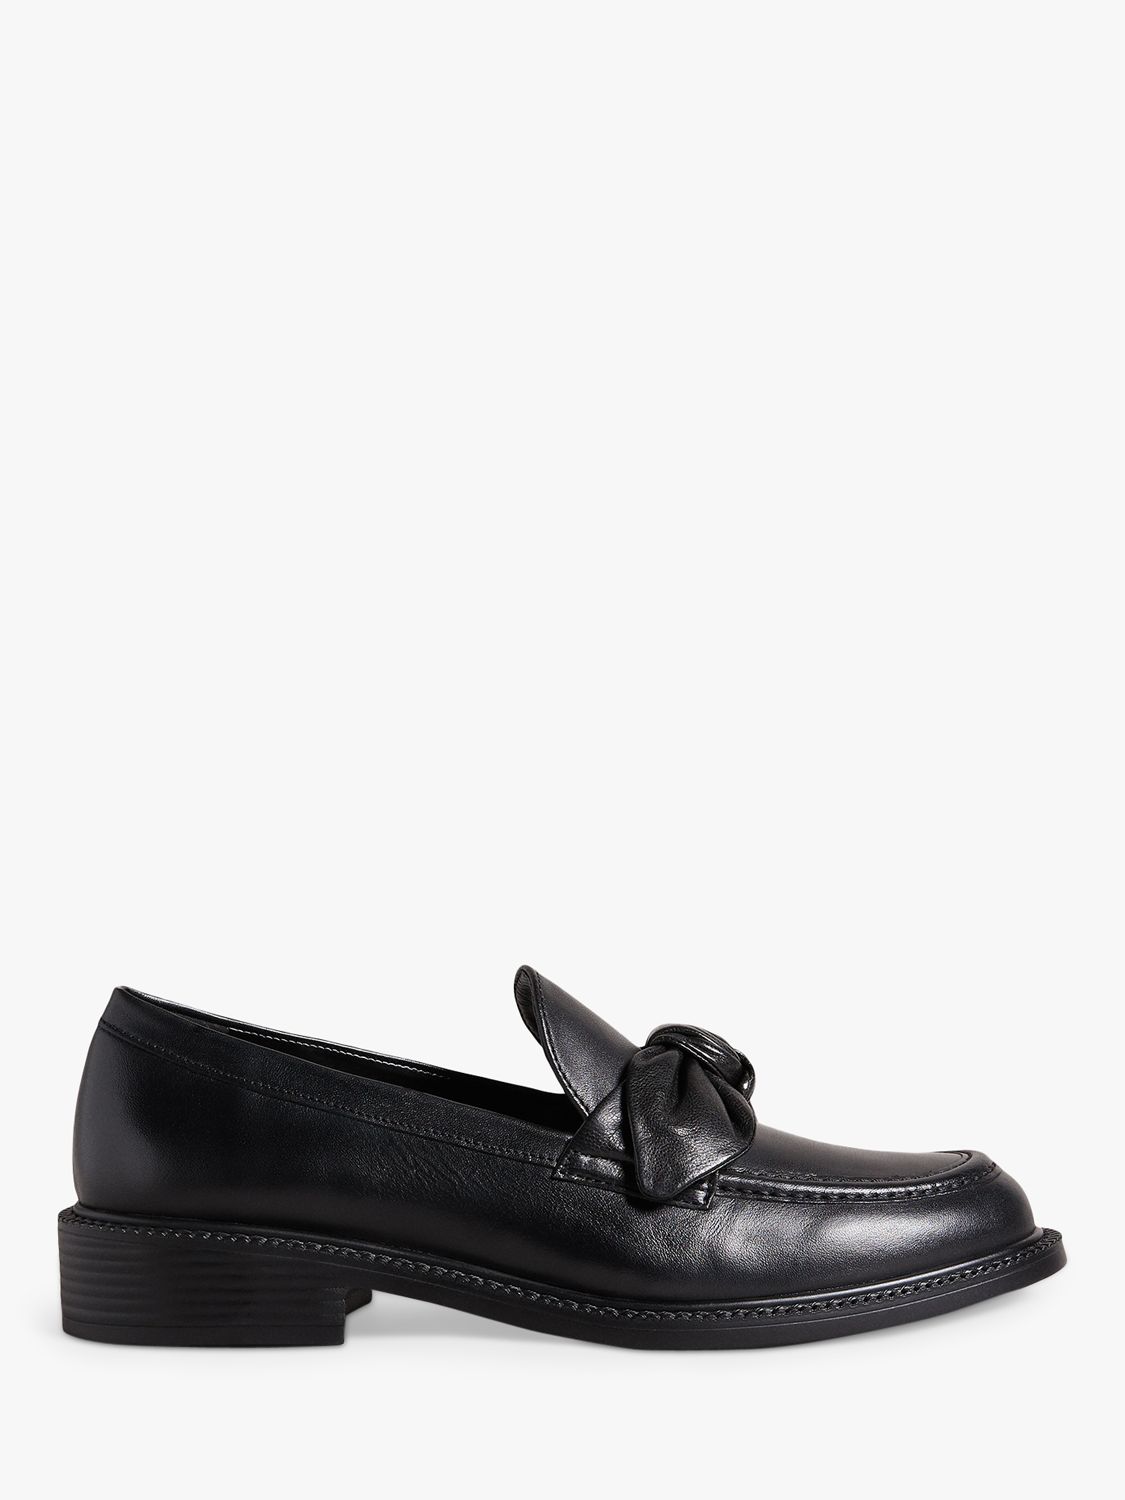 Ted Baker Lacy Leather Bow Loafers, Black at John Lewis & Partners